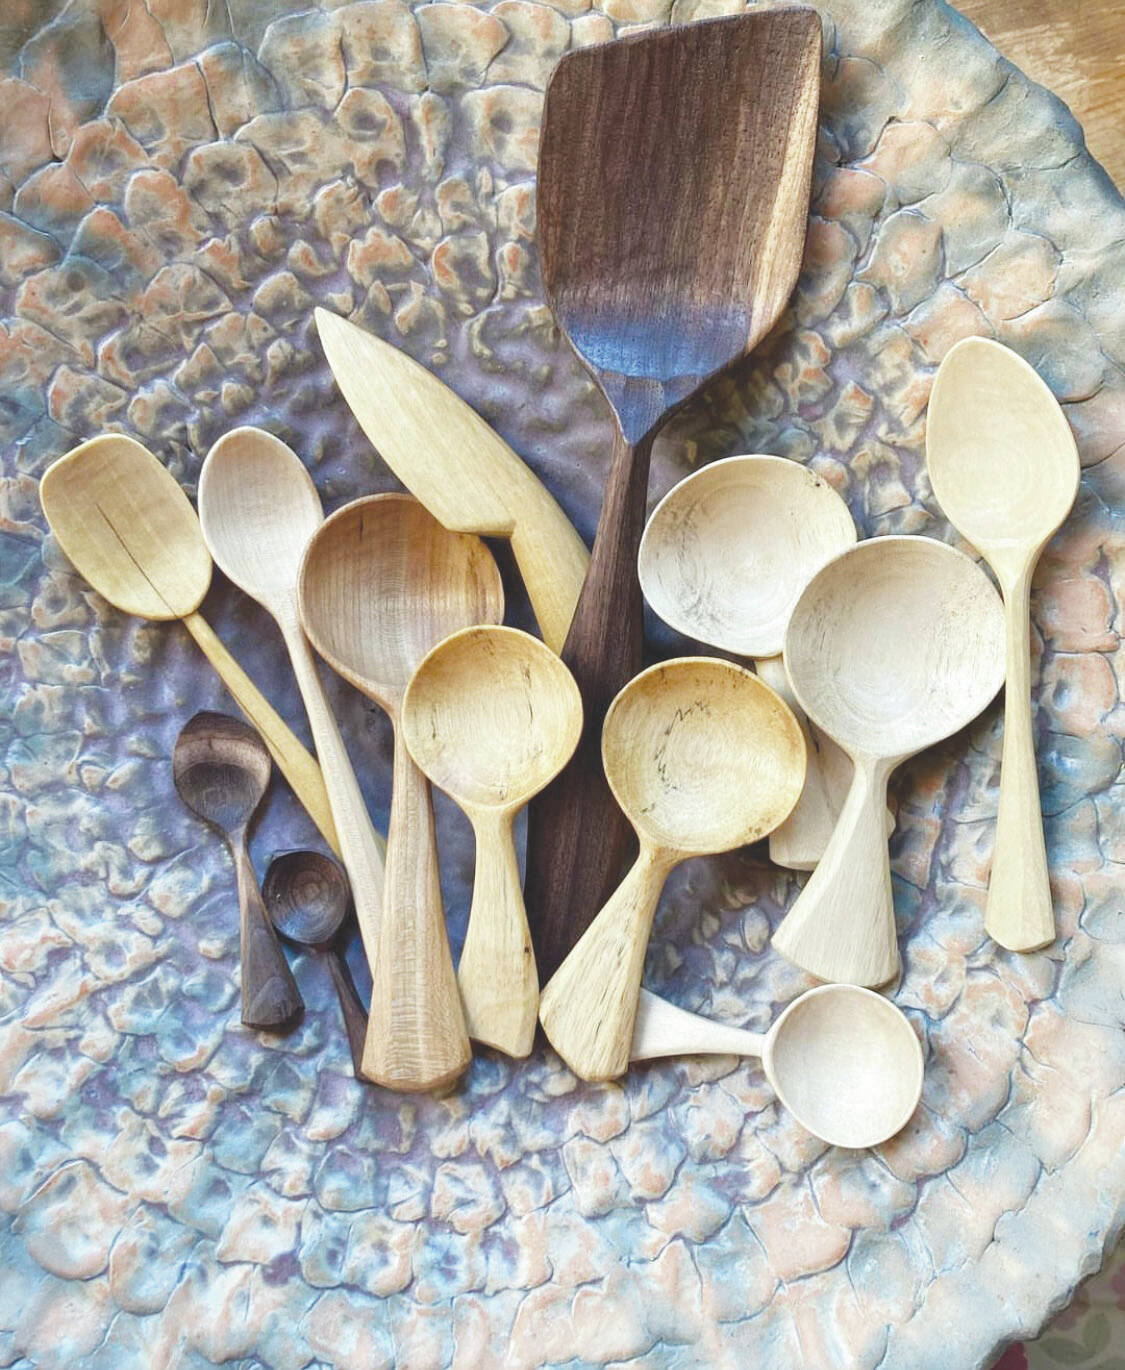 Photo provided by Willow Q. Jones/courtesy
Hand carved wooden spoons made by Willow Q. Jones in her home studio, 2021.